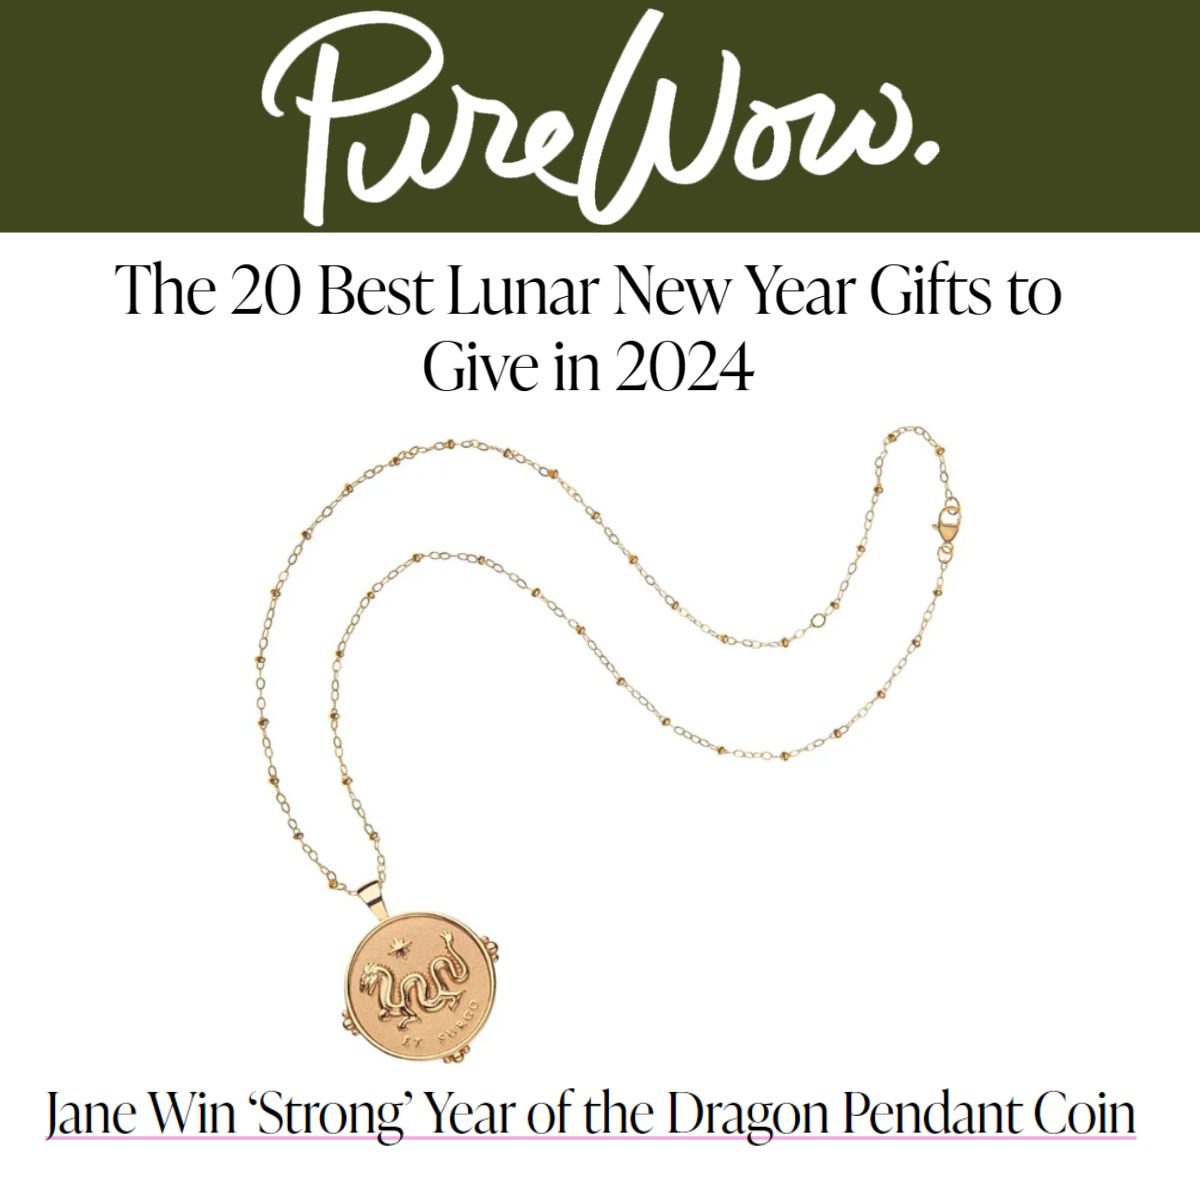 Press Highlight: Pure Wow's "The Best 20 Lunar New Year Gifts to Give in 2024"